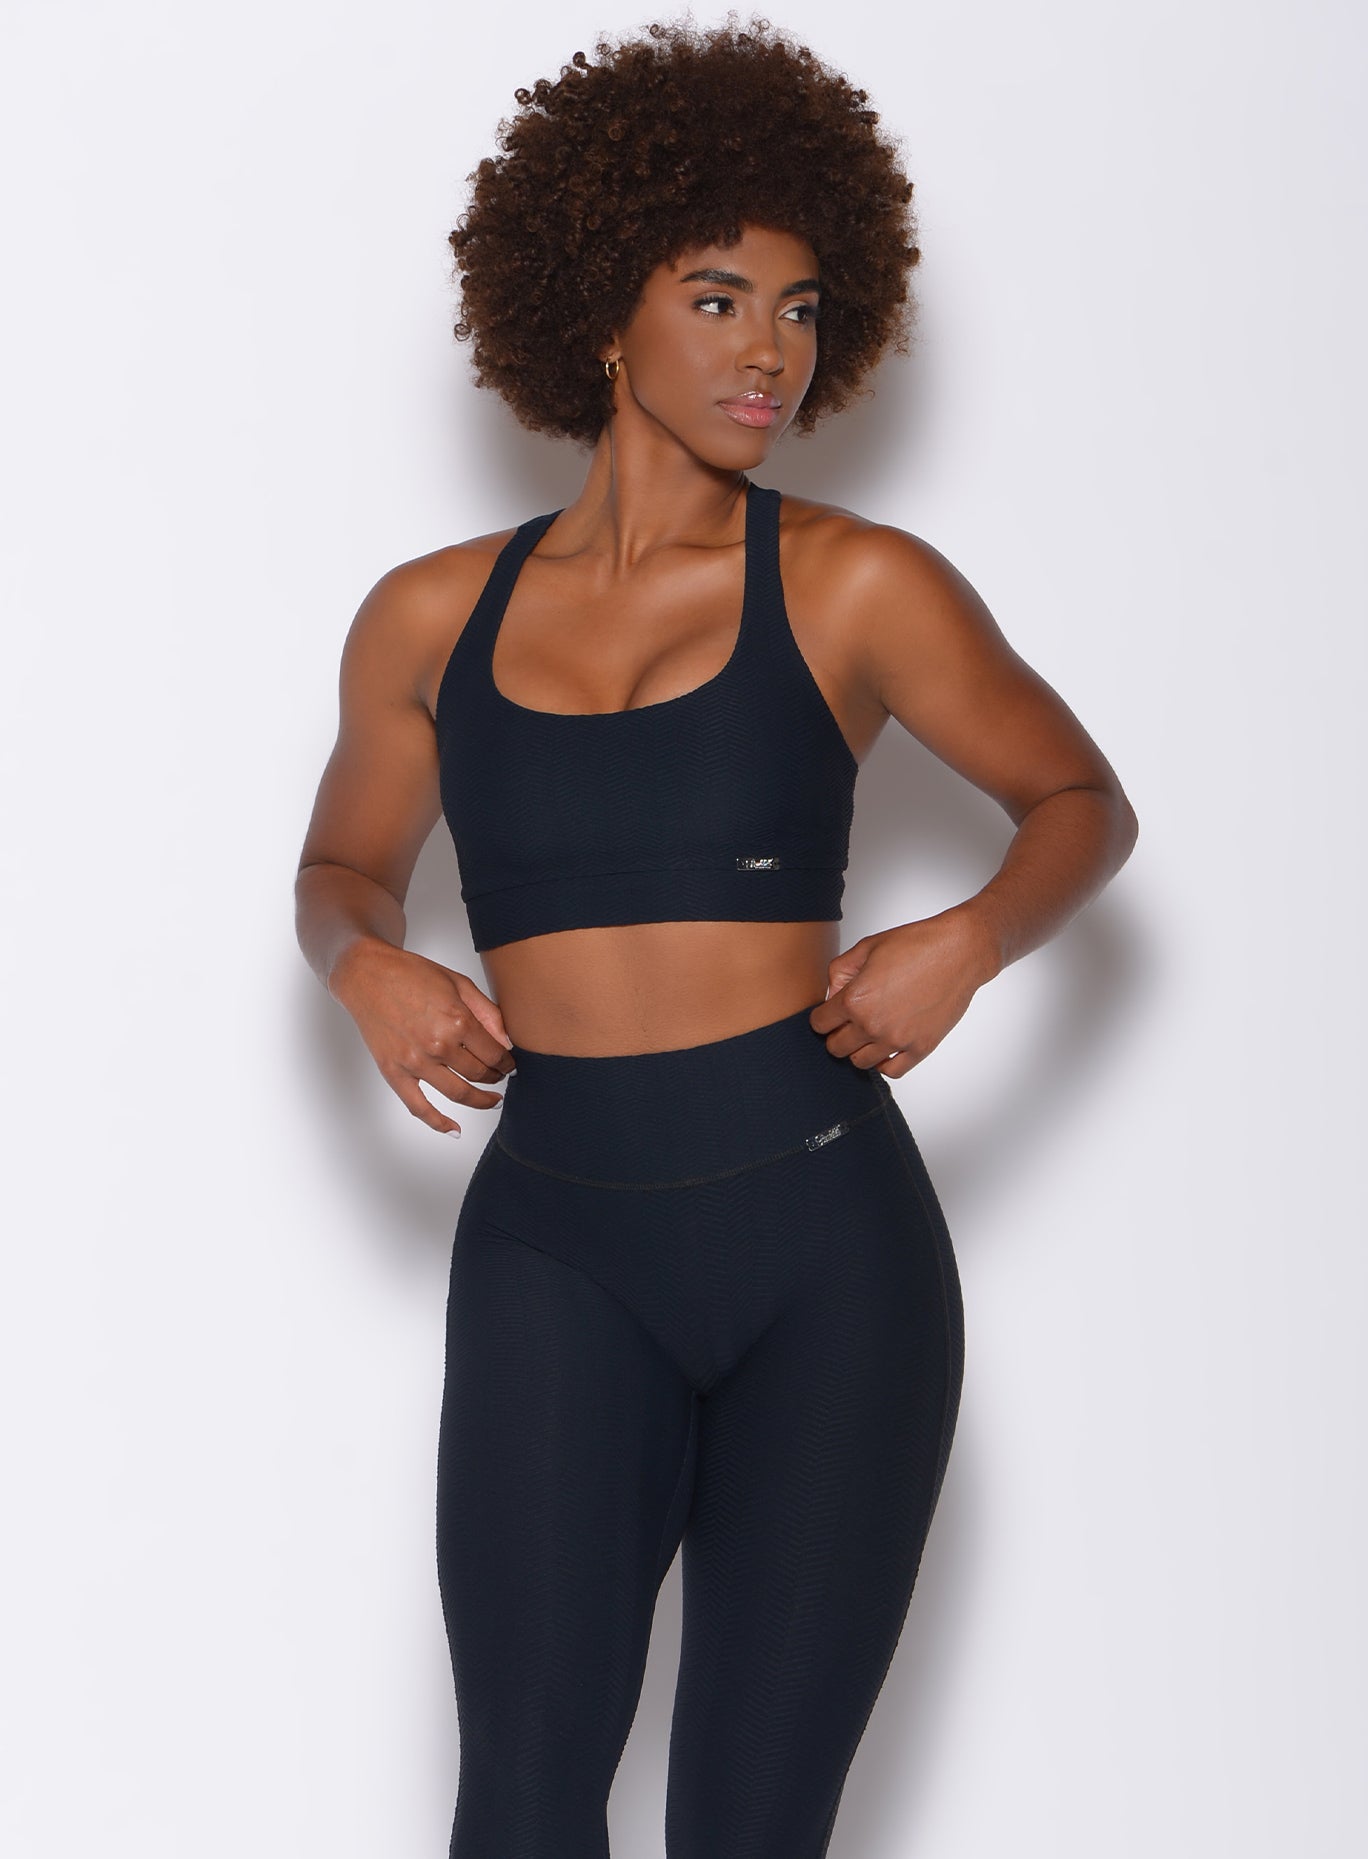 Front profile view of a model facing to her left wearing our chevron sports bra in jet black color and a matching leggings